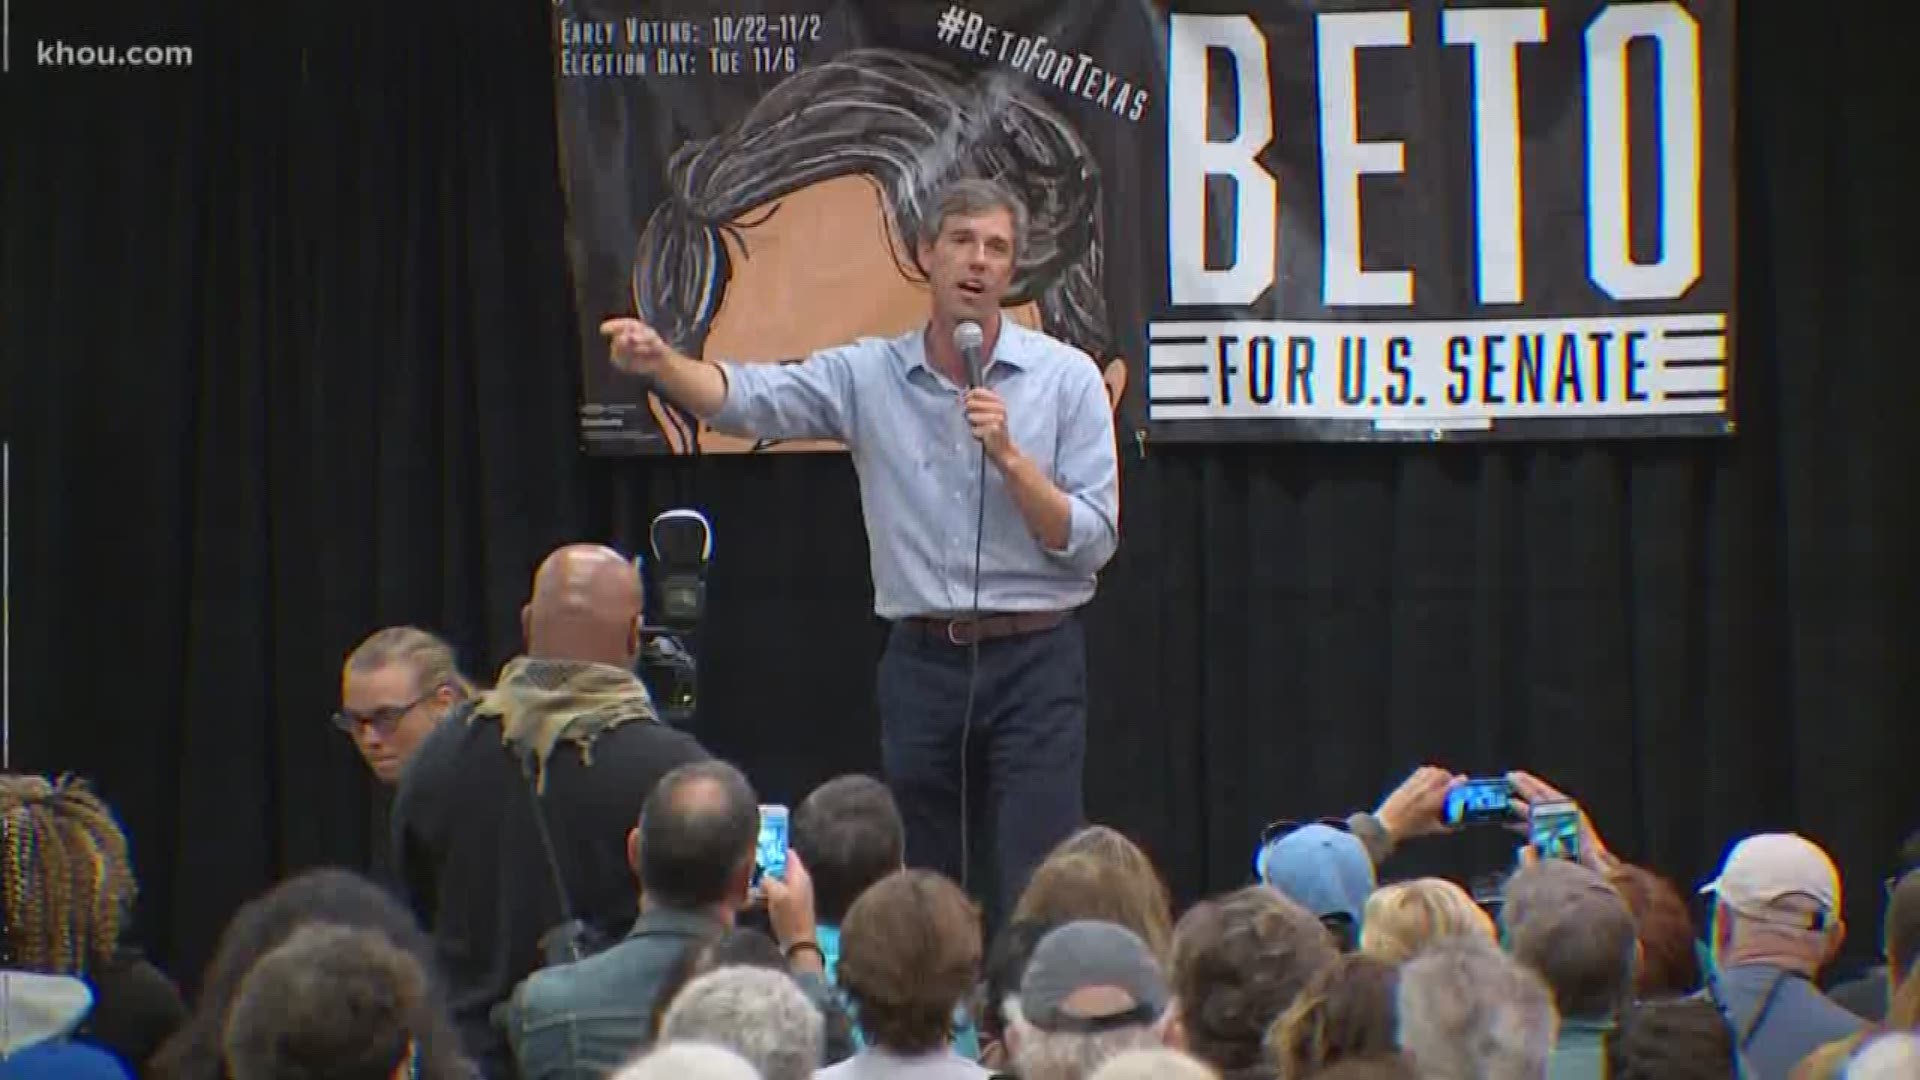 Congressman Beto O'Rourke says he is no longer ruling out a 2020 run for the White House. He held a town hall meeting in his hometown of El Paso Monday and said he and his wife made a decision not to rule anything out.